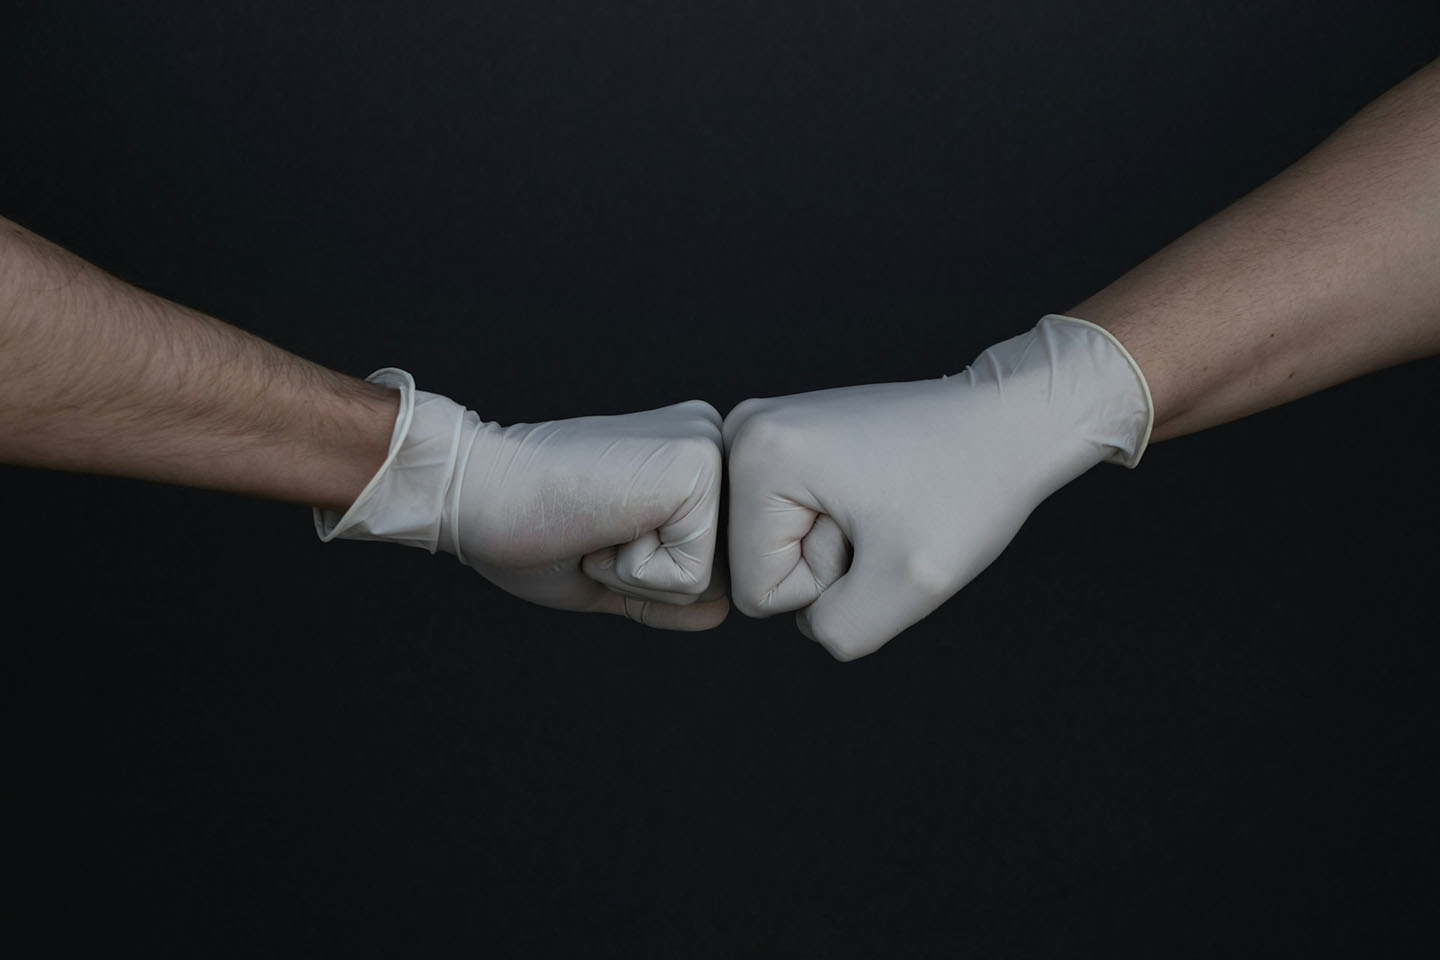 A pair of gloved hands performing the gesture known as fist-bumping.